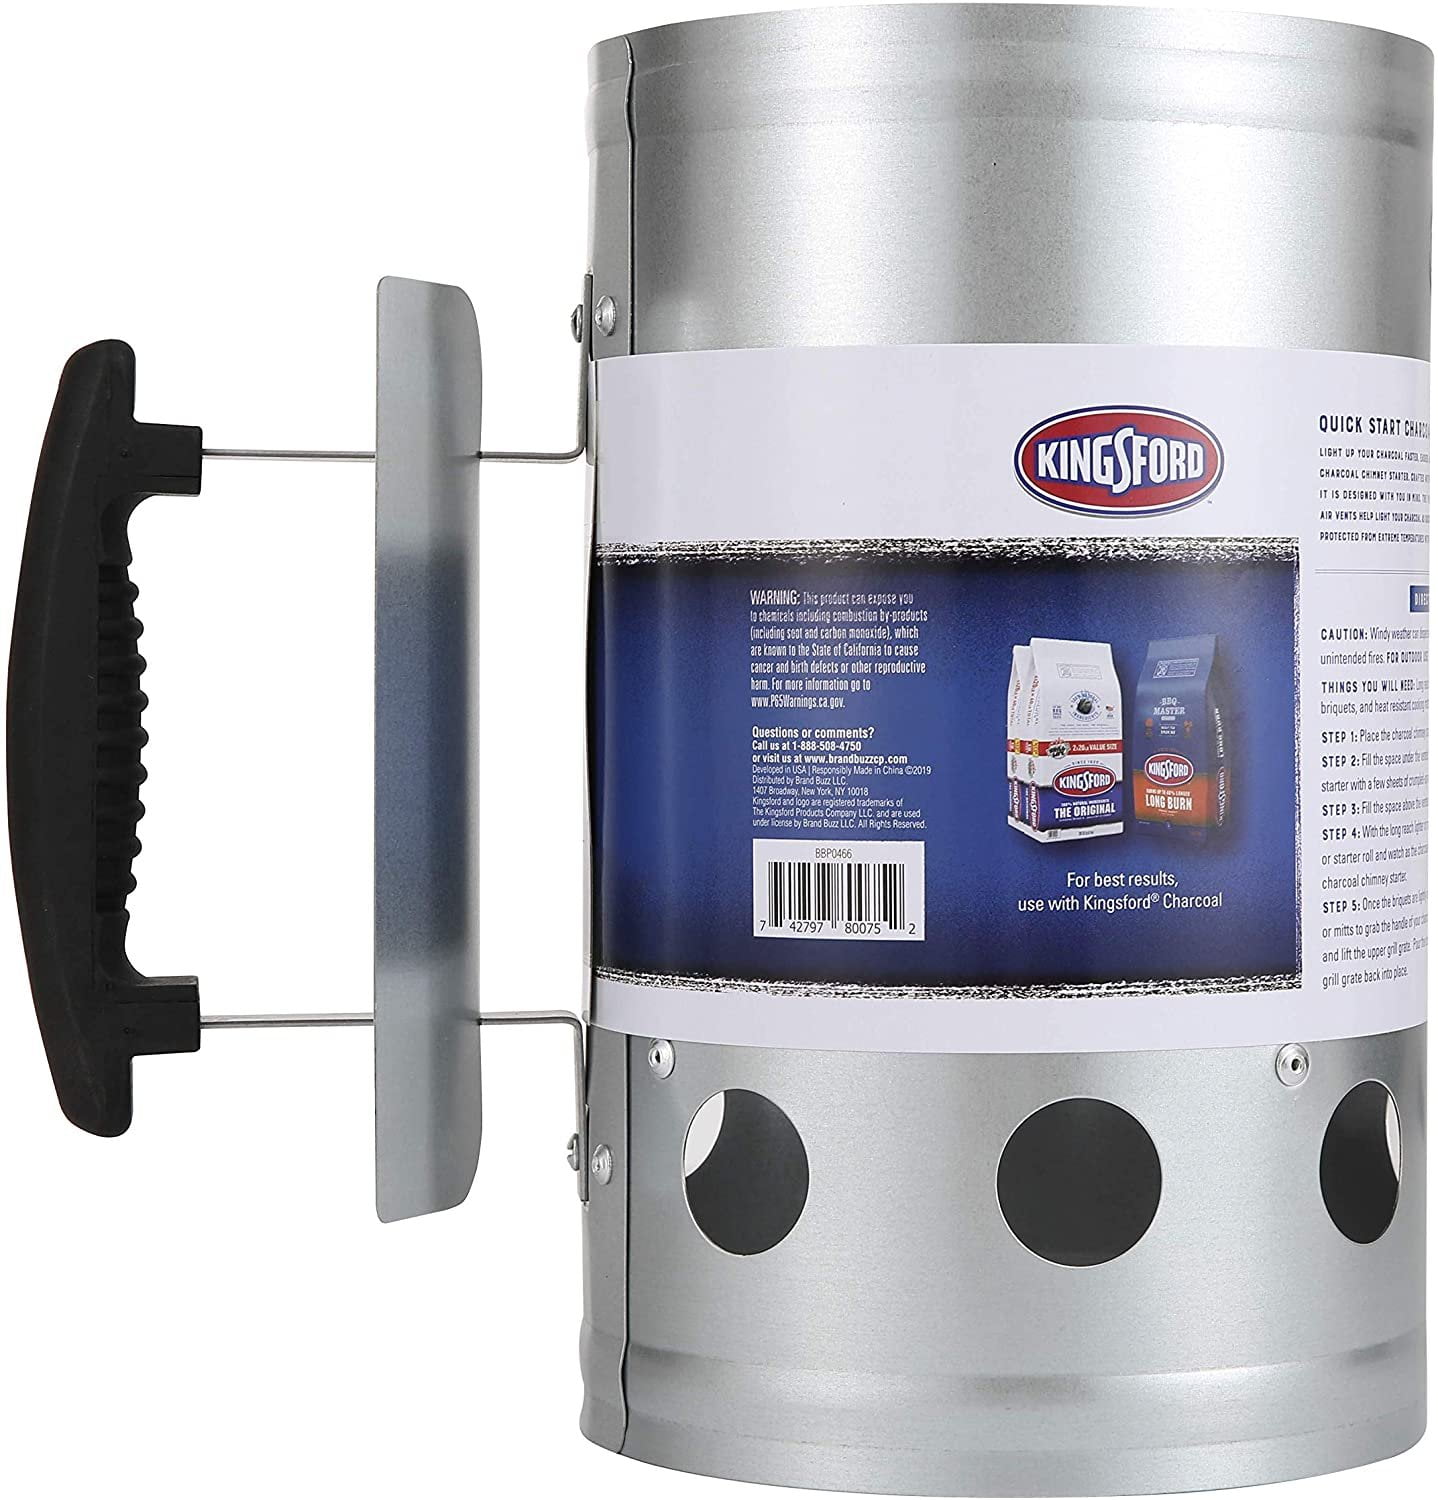 Kingsford BB0466 Deluxe Charcoal Chimney Starter Silver 